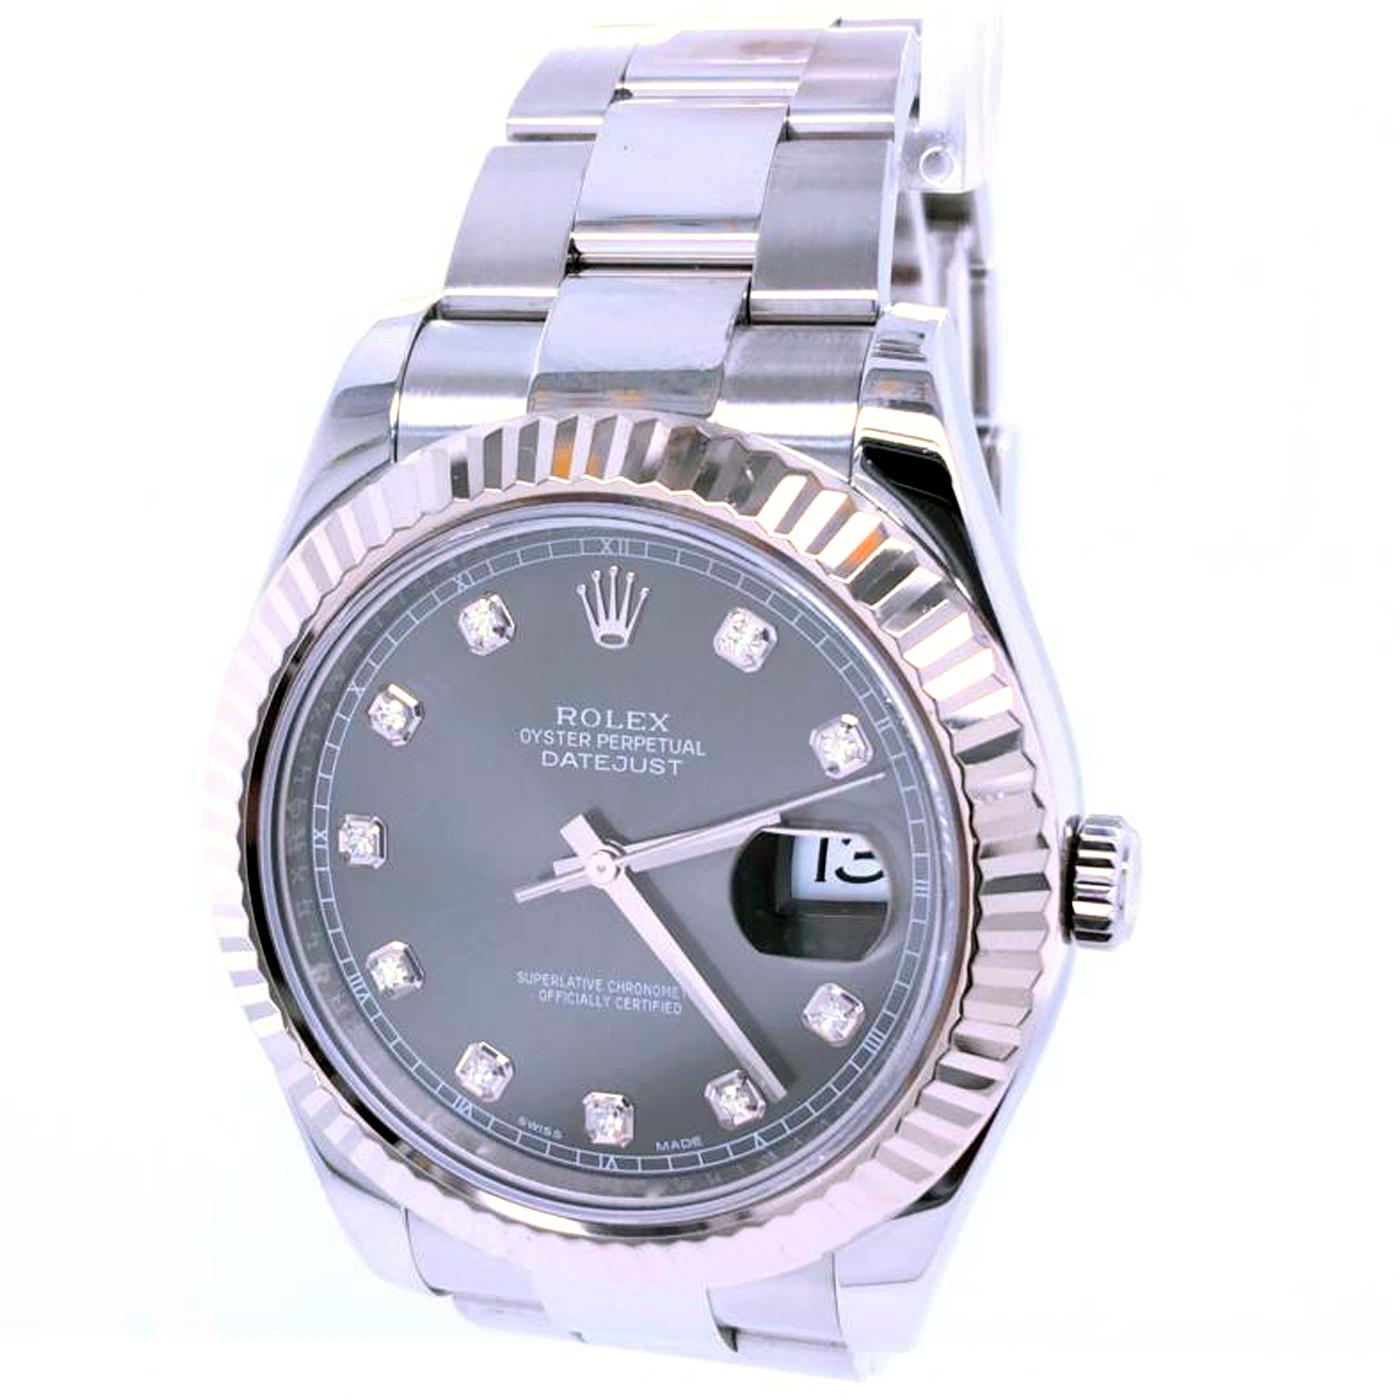 This Rolex Datejust II 41mm has diamond hour markers. Minute markers around the outer rim. Dial Type: Analog. The date display appears at the 3 o'clock position. Automatic movement. Scratch-resistant sapphire crystal. Screw down the crown. Solid